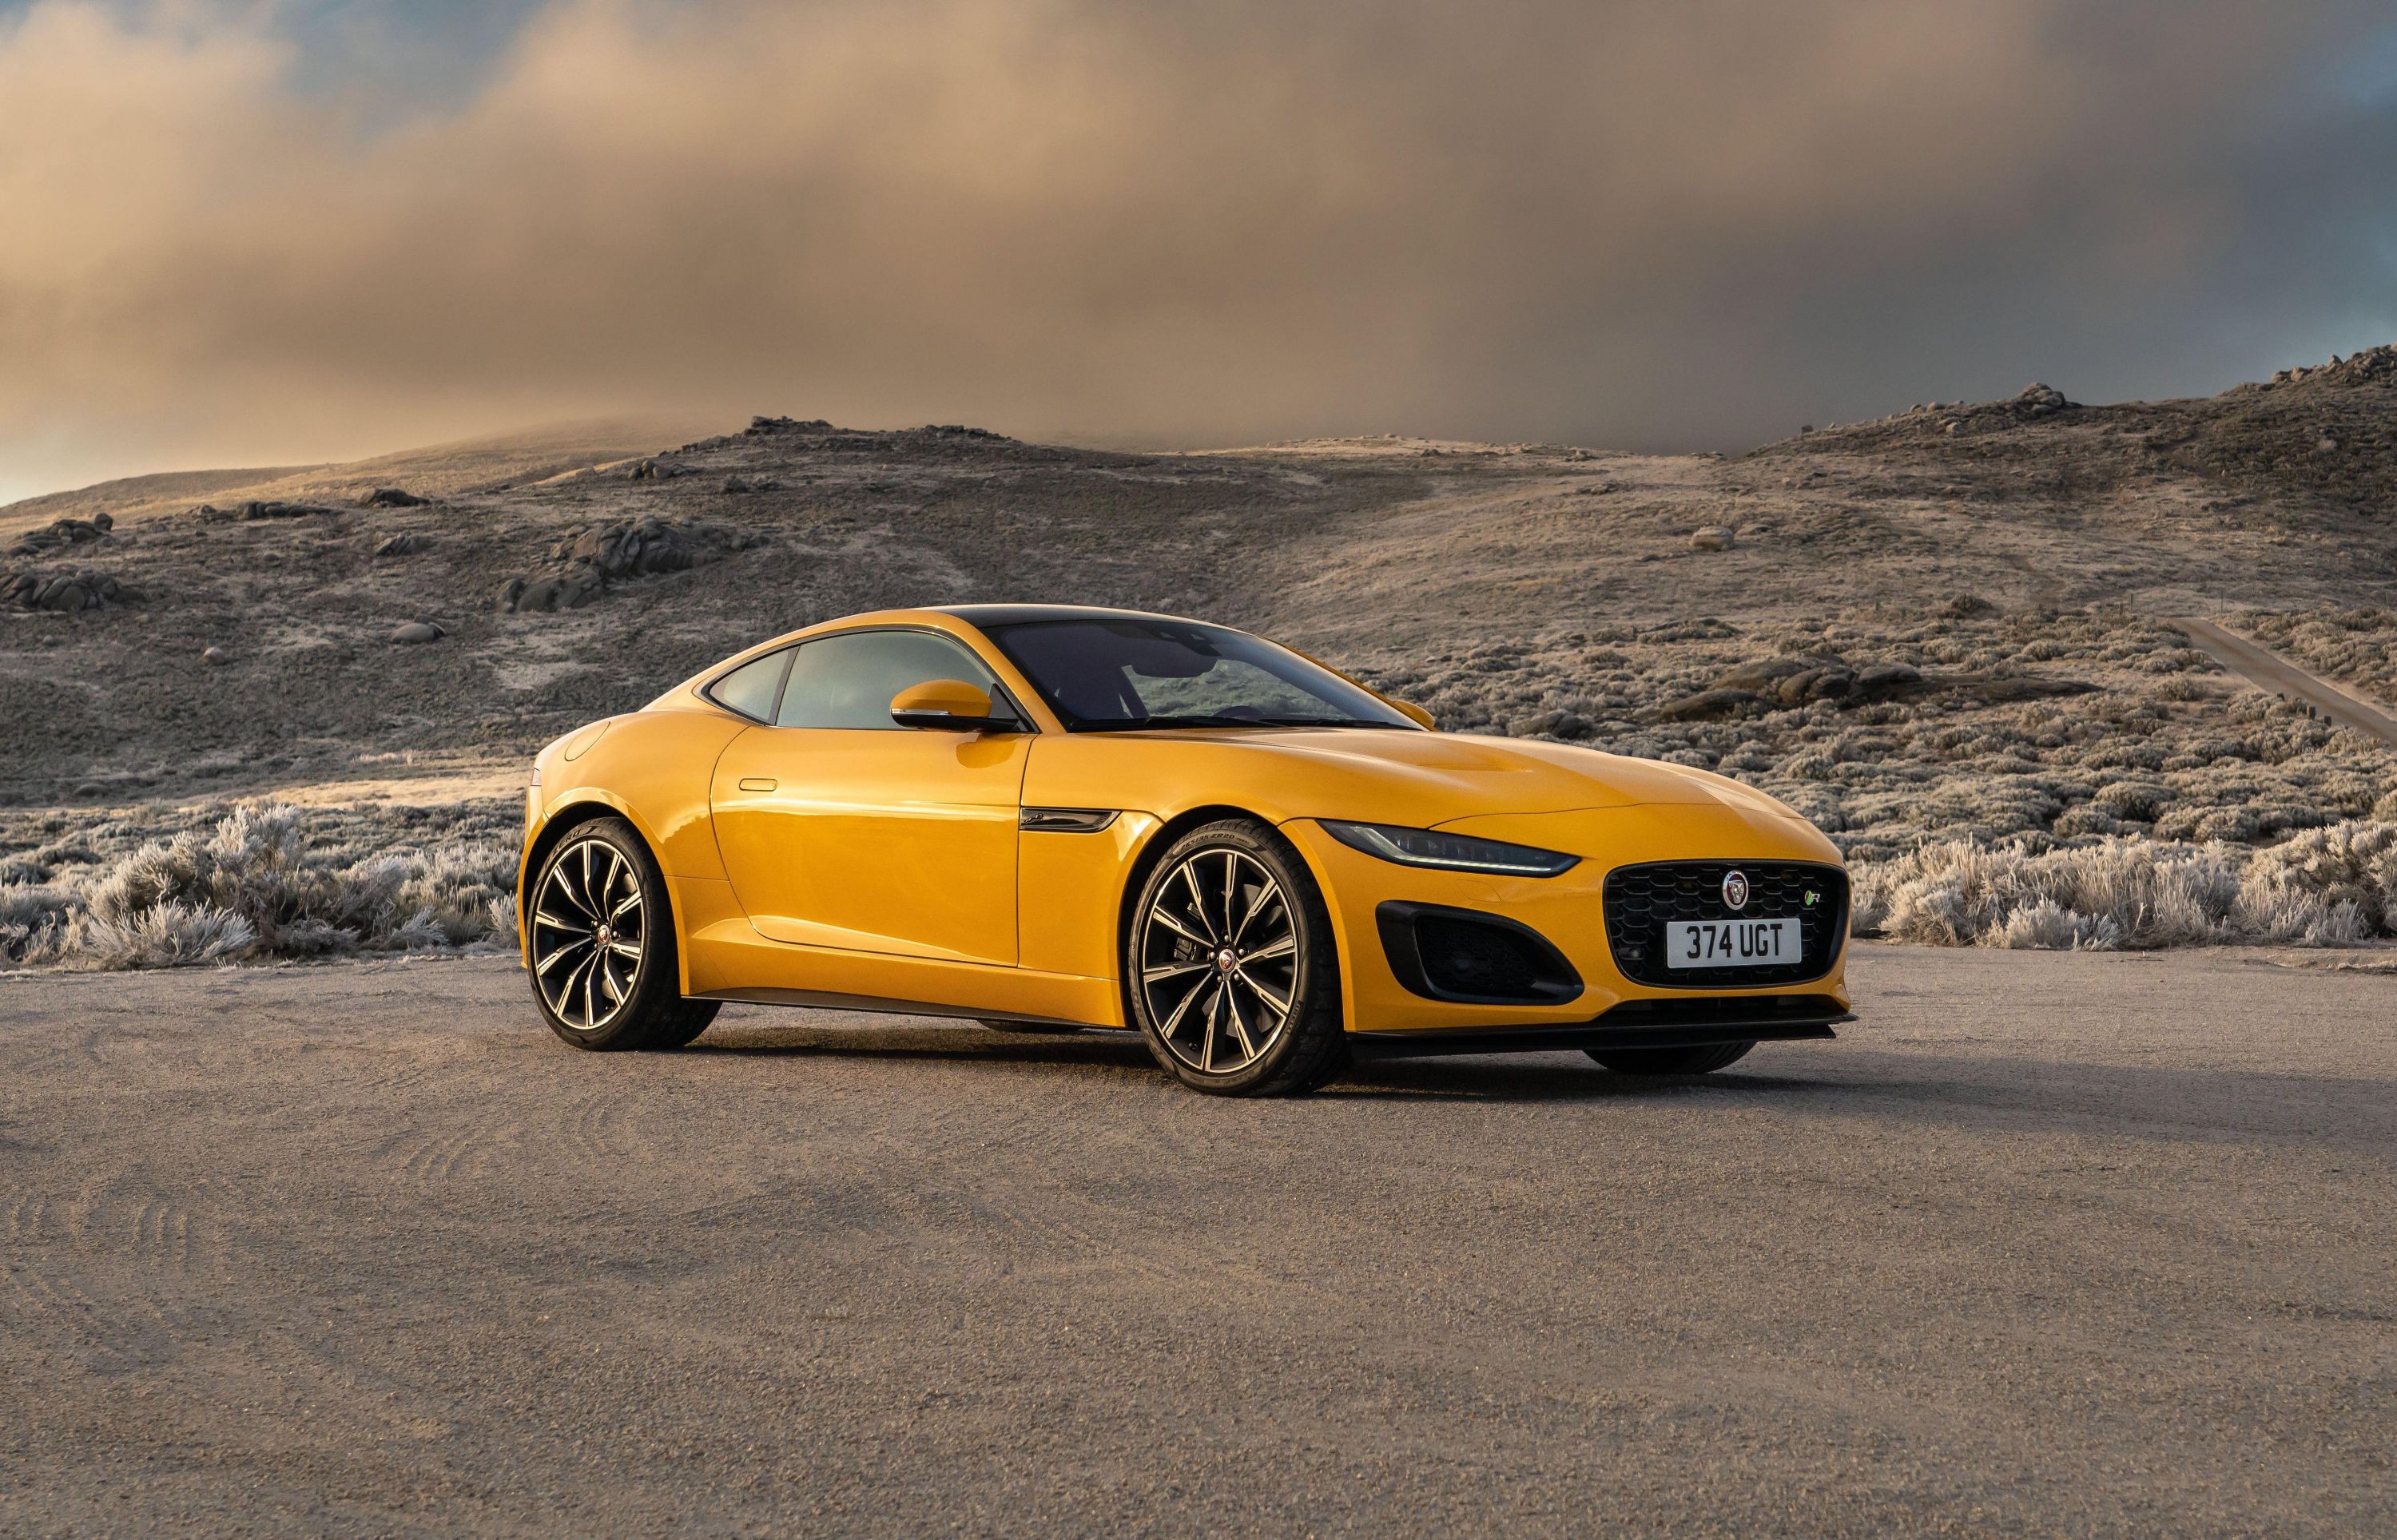 2021 Jaguar F-Type Heritage 60 Edition coming for E-Type's ...